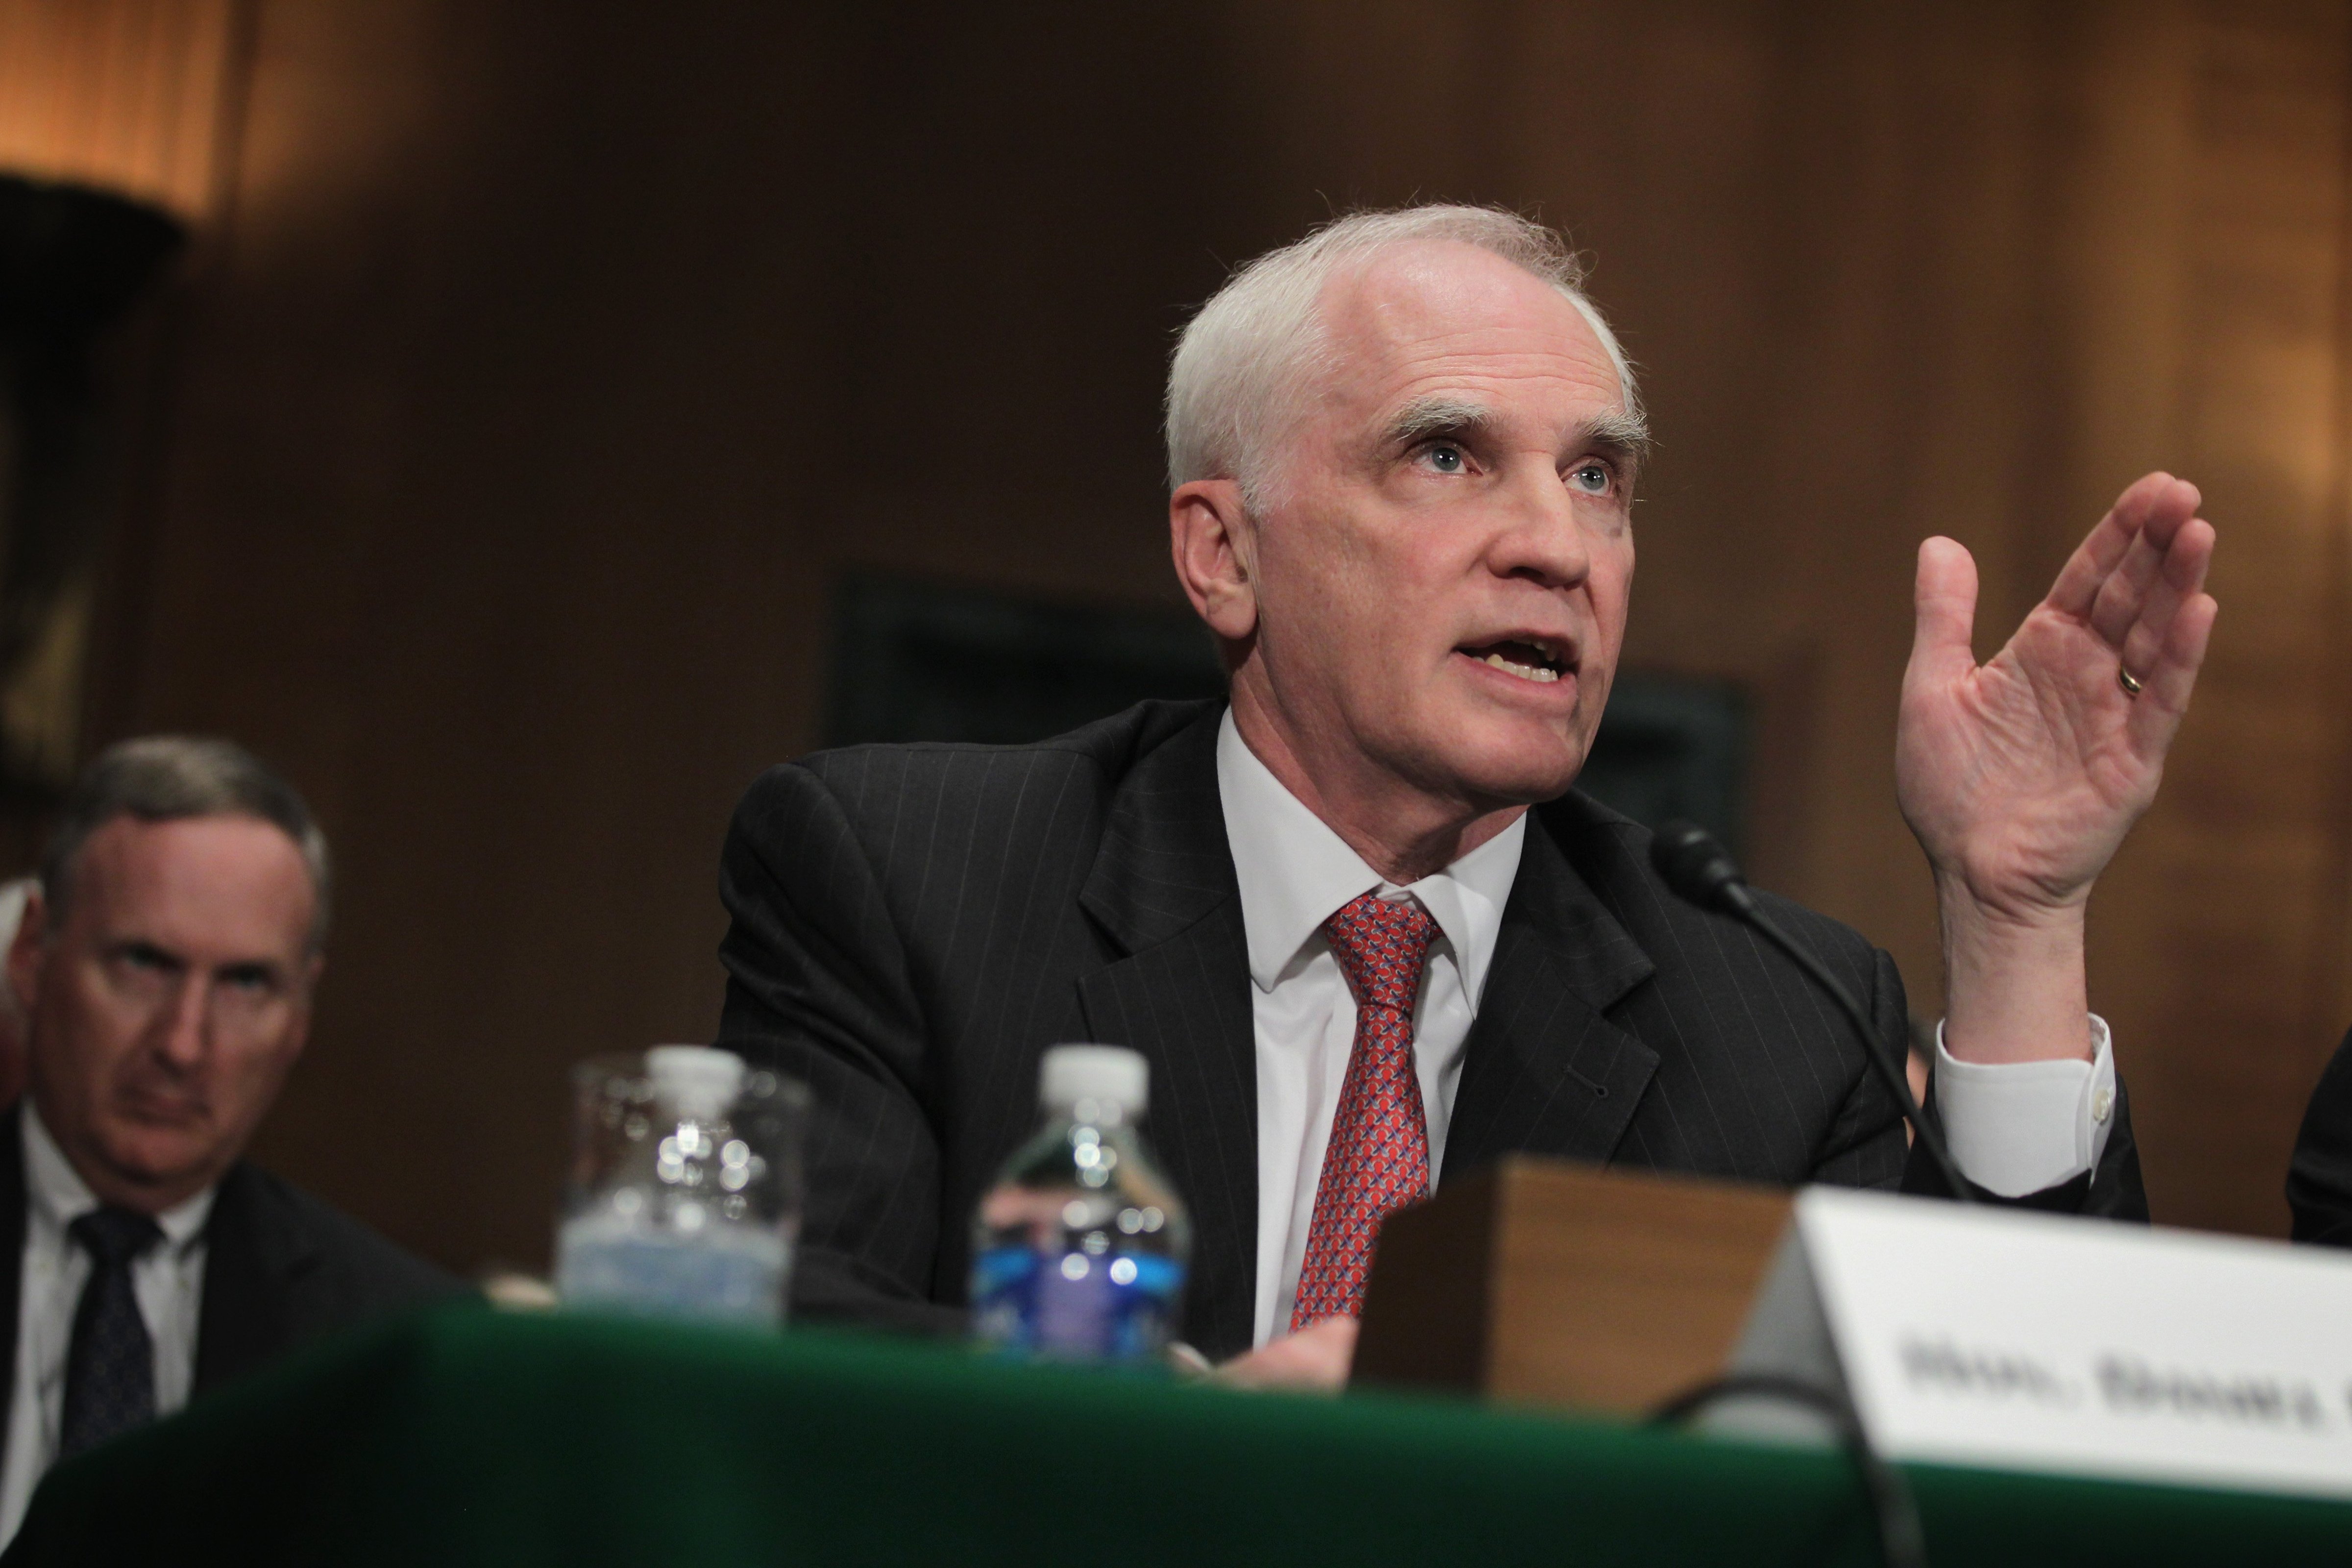 Federal Reserve Board of Governors member Daniel Tarullo testifies during a hearing before Senate Banking, Housing and Urban Affairs Committeeon Sept. 9, 2014 on Capitol Hill in Washington, DC. (Alex Wong—Getty Images)